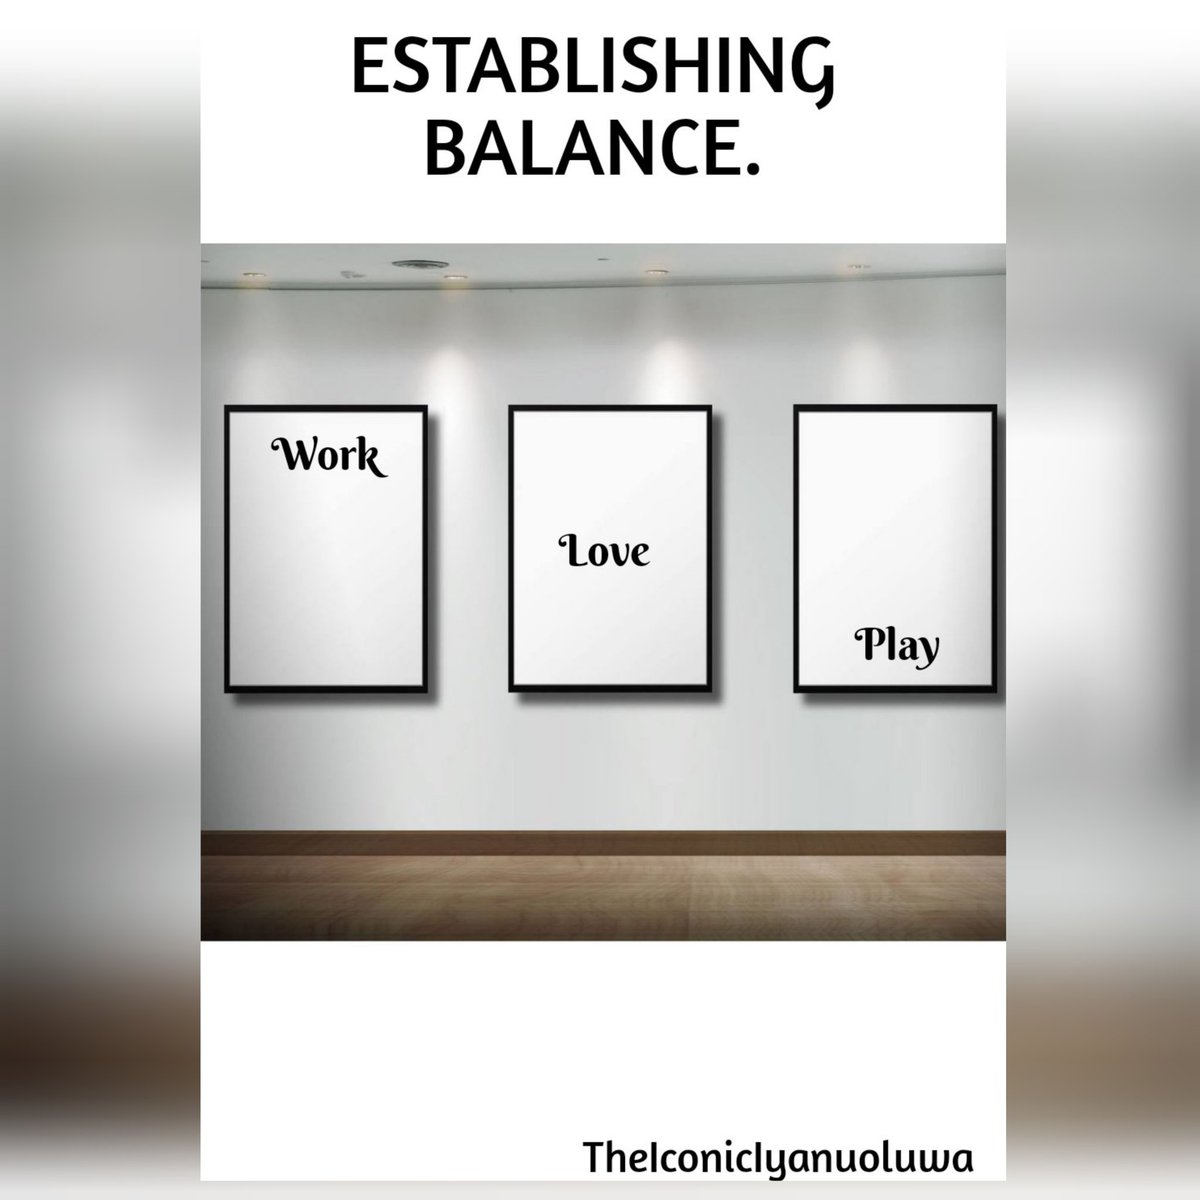 2/2
It takes incredible deliberateness, but perfectly incorporating these three things is the near definition of an awesome human being.

#work #love #dilligence #bedeliberate #play #balance #beintentionaleveryday #fusion #excercise #establishingbalance

©TheHandwritingOnTheWall